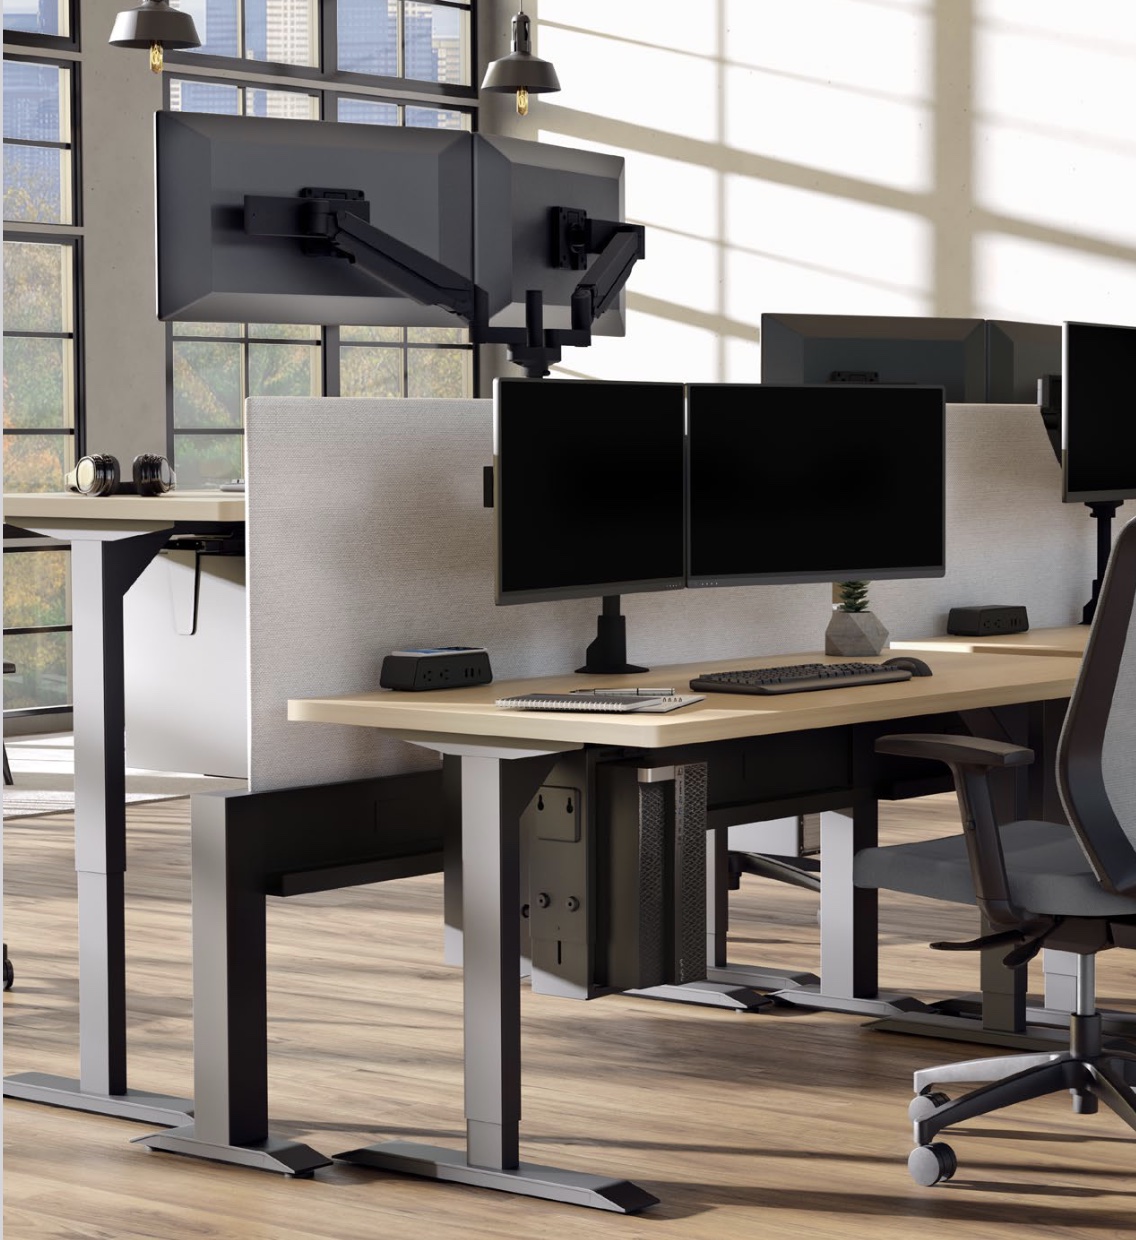 HAT Collective E2 Connex Adjustable Monitor Arms